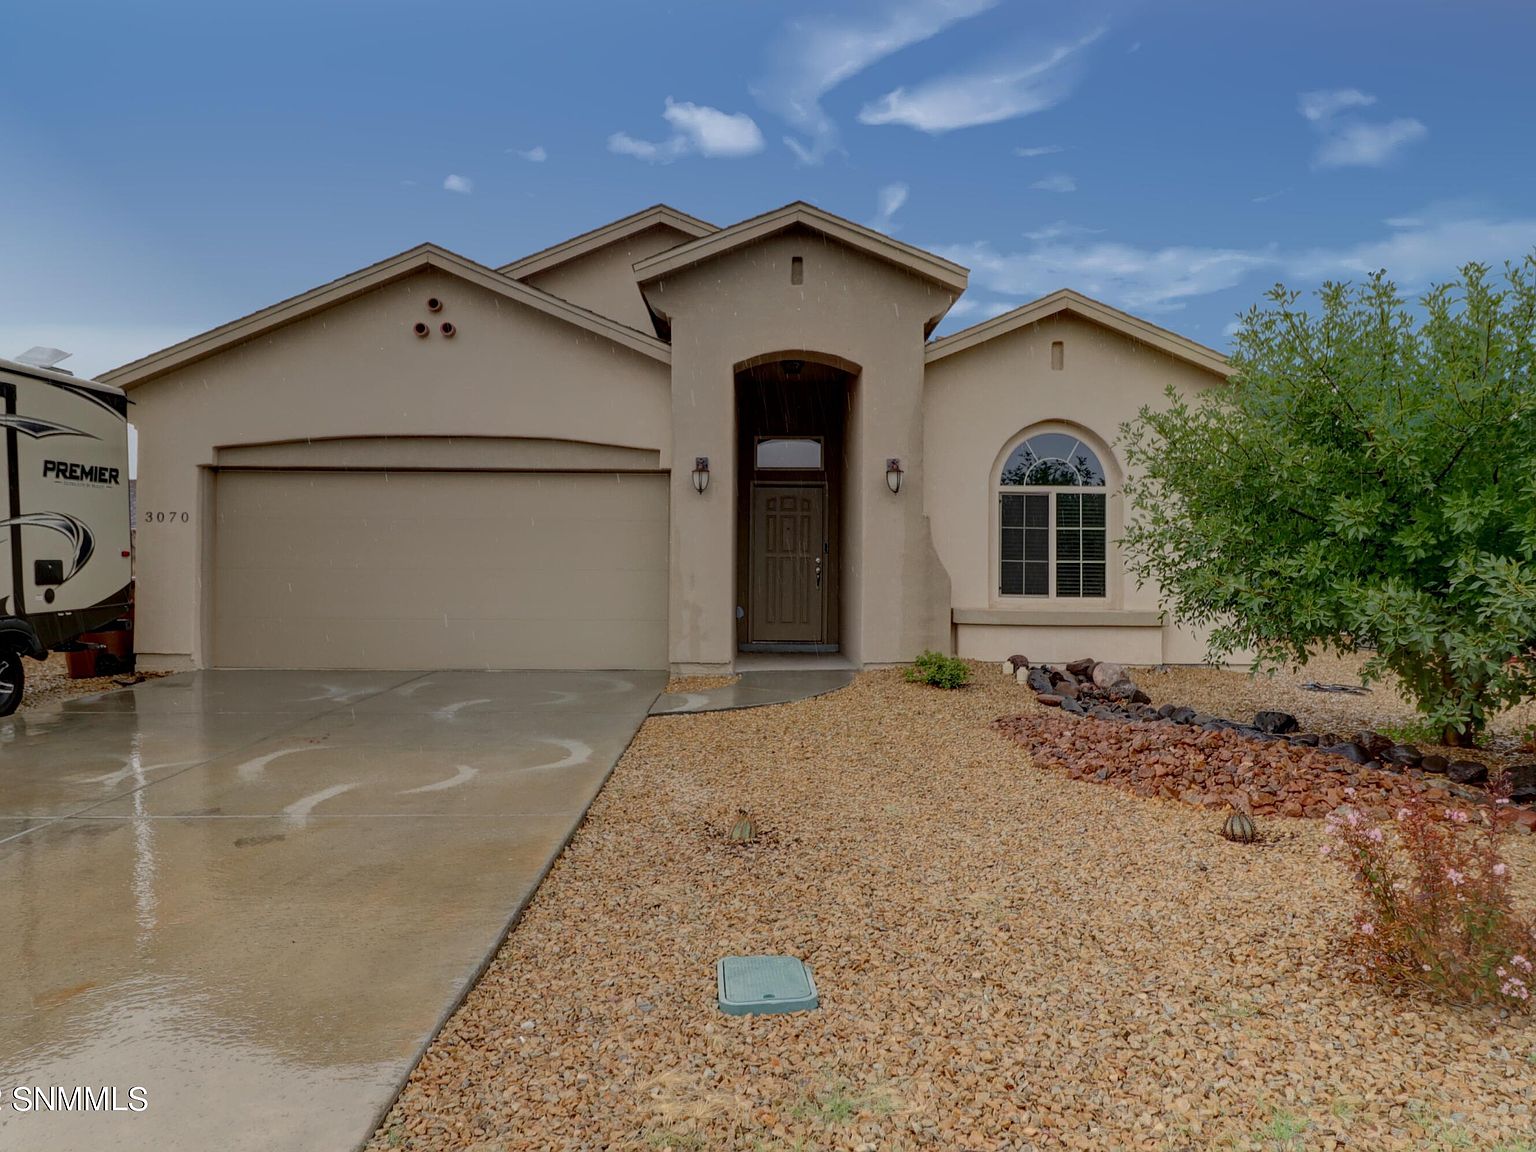 3070 Agua Ladoso Ave, Las Cruces, NM 88012 | Zillow